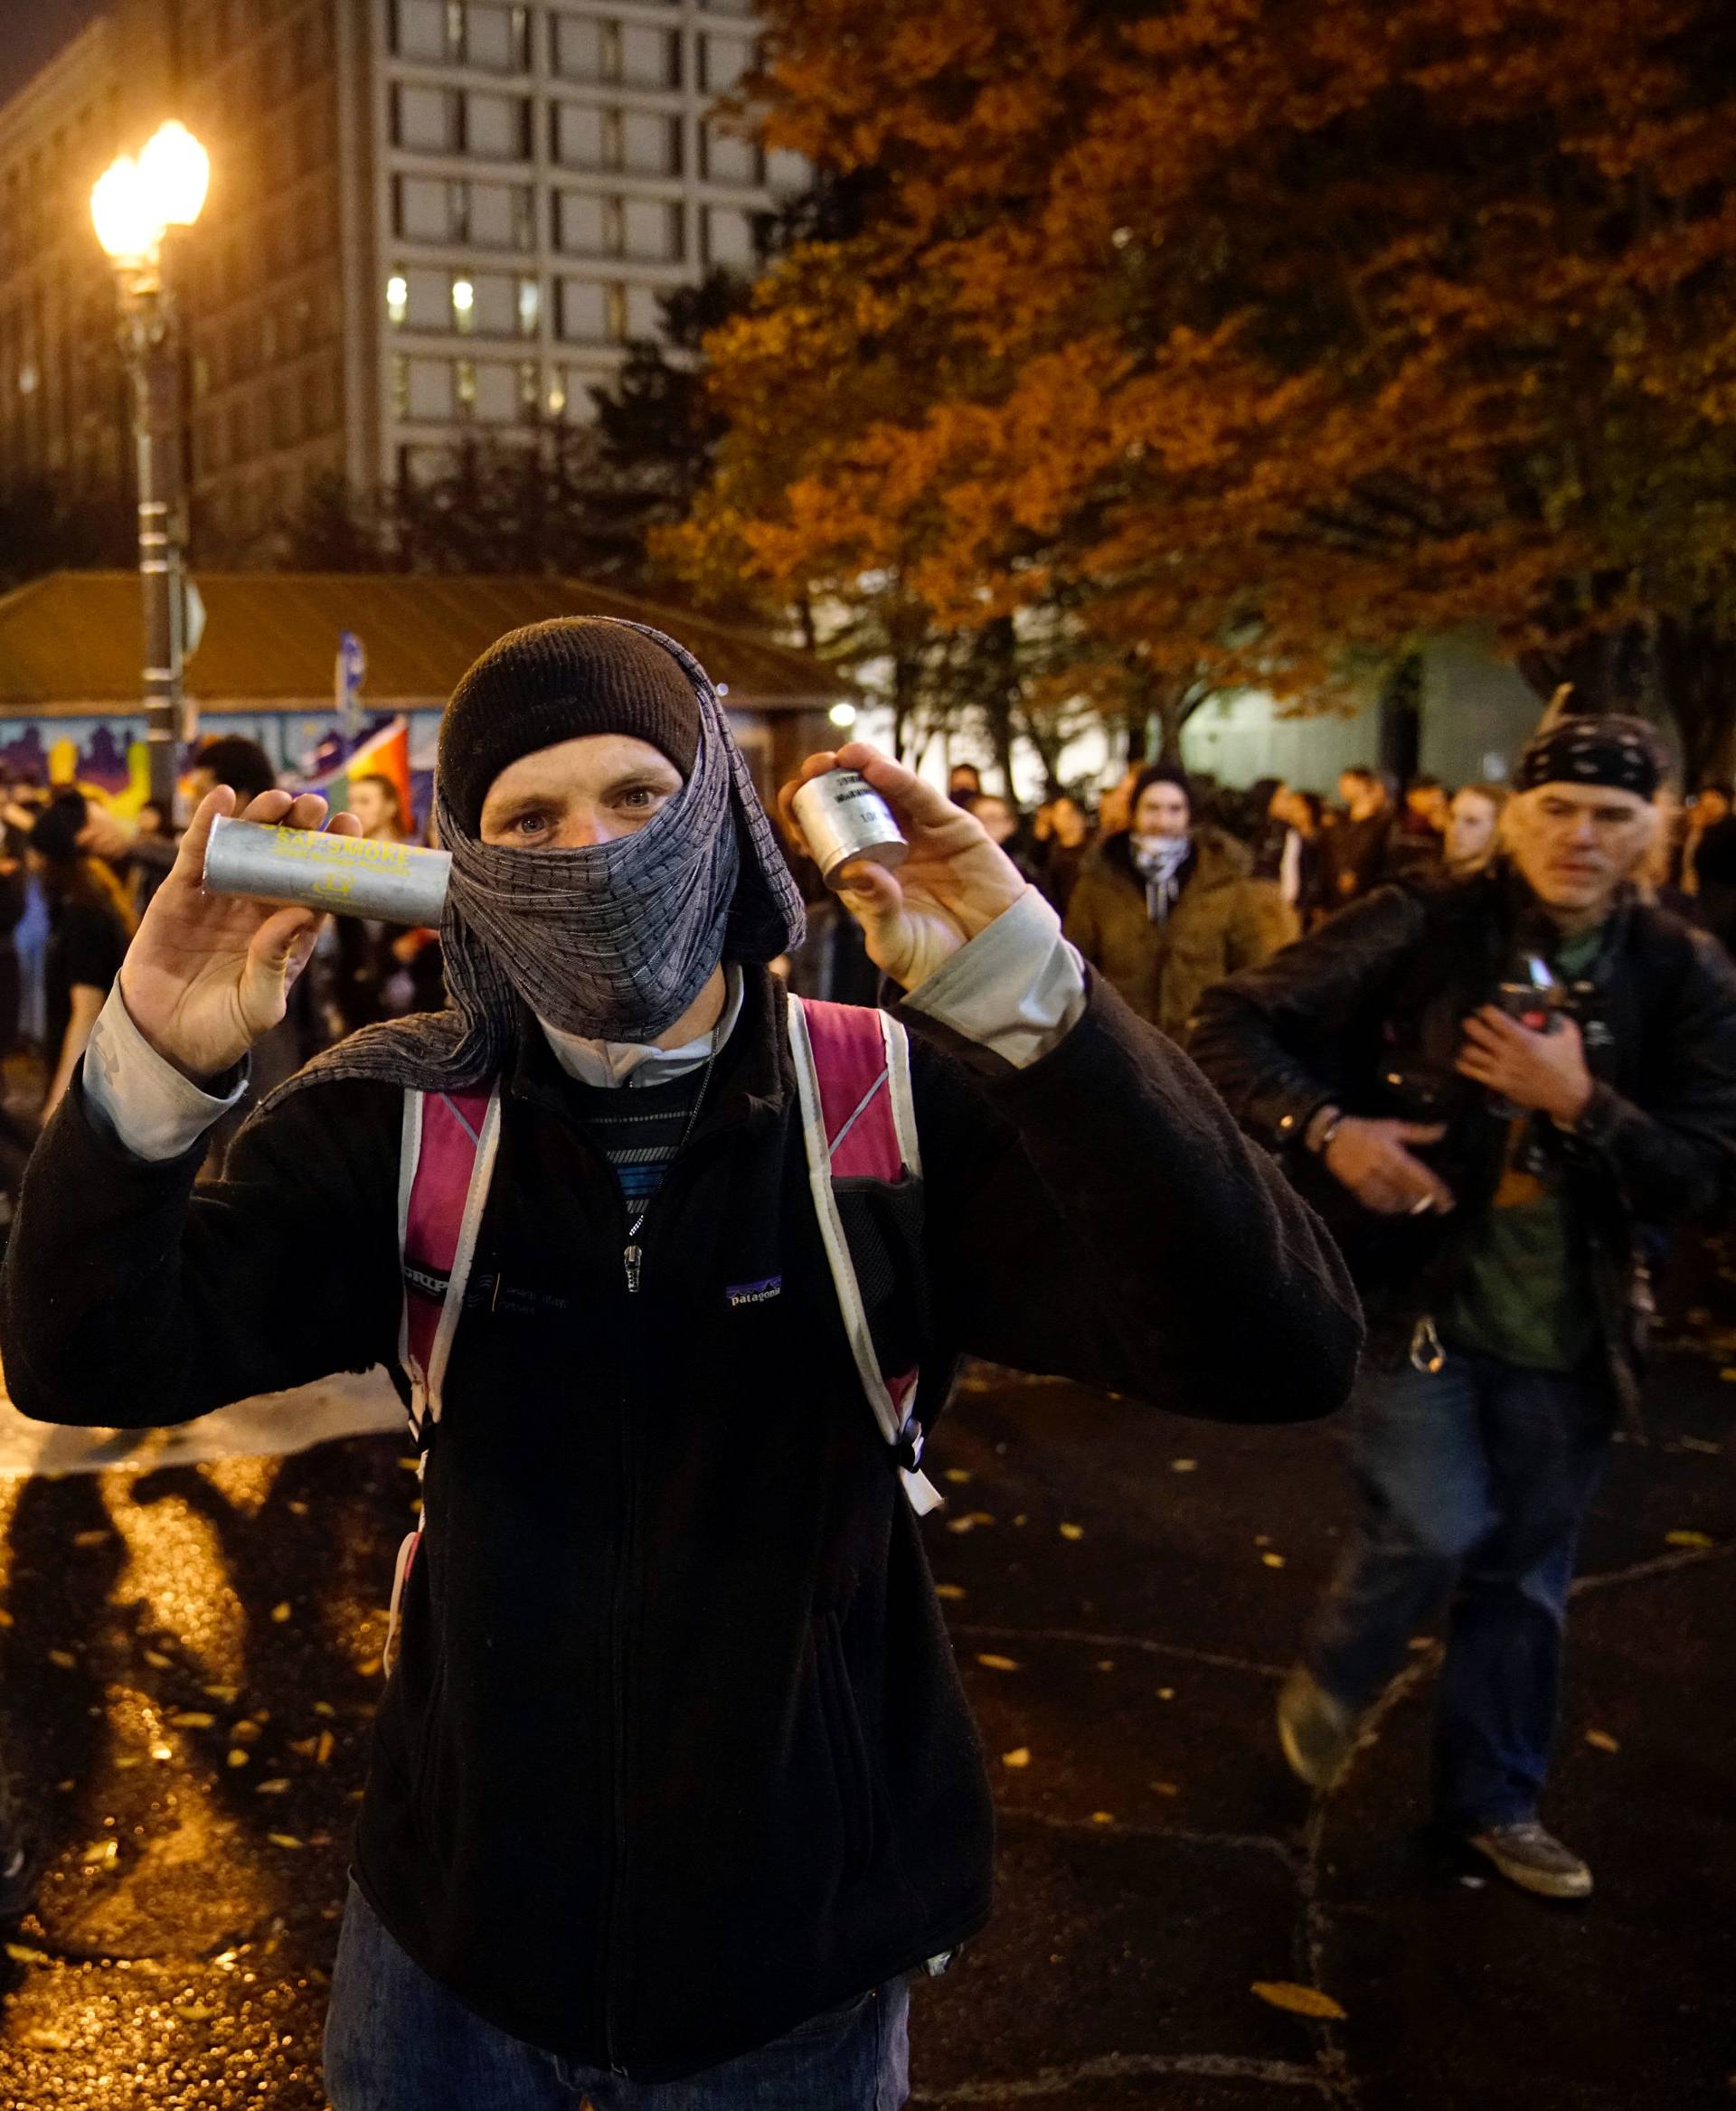 A demonstrator holds up cartridges during a protest against the election of Republican Donald Trump as President of the United States in Portland, Oregon